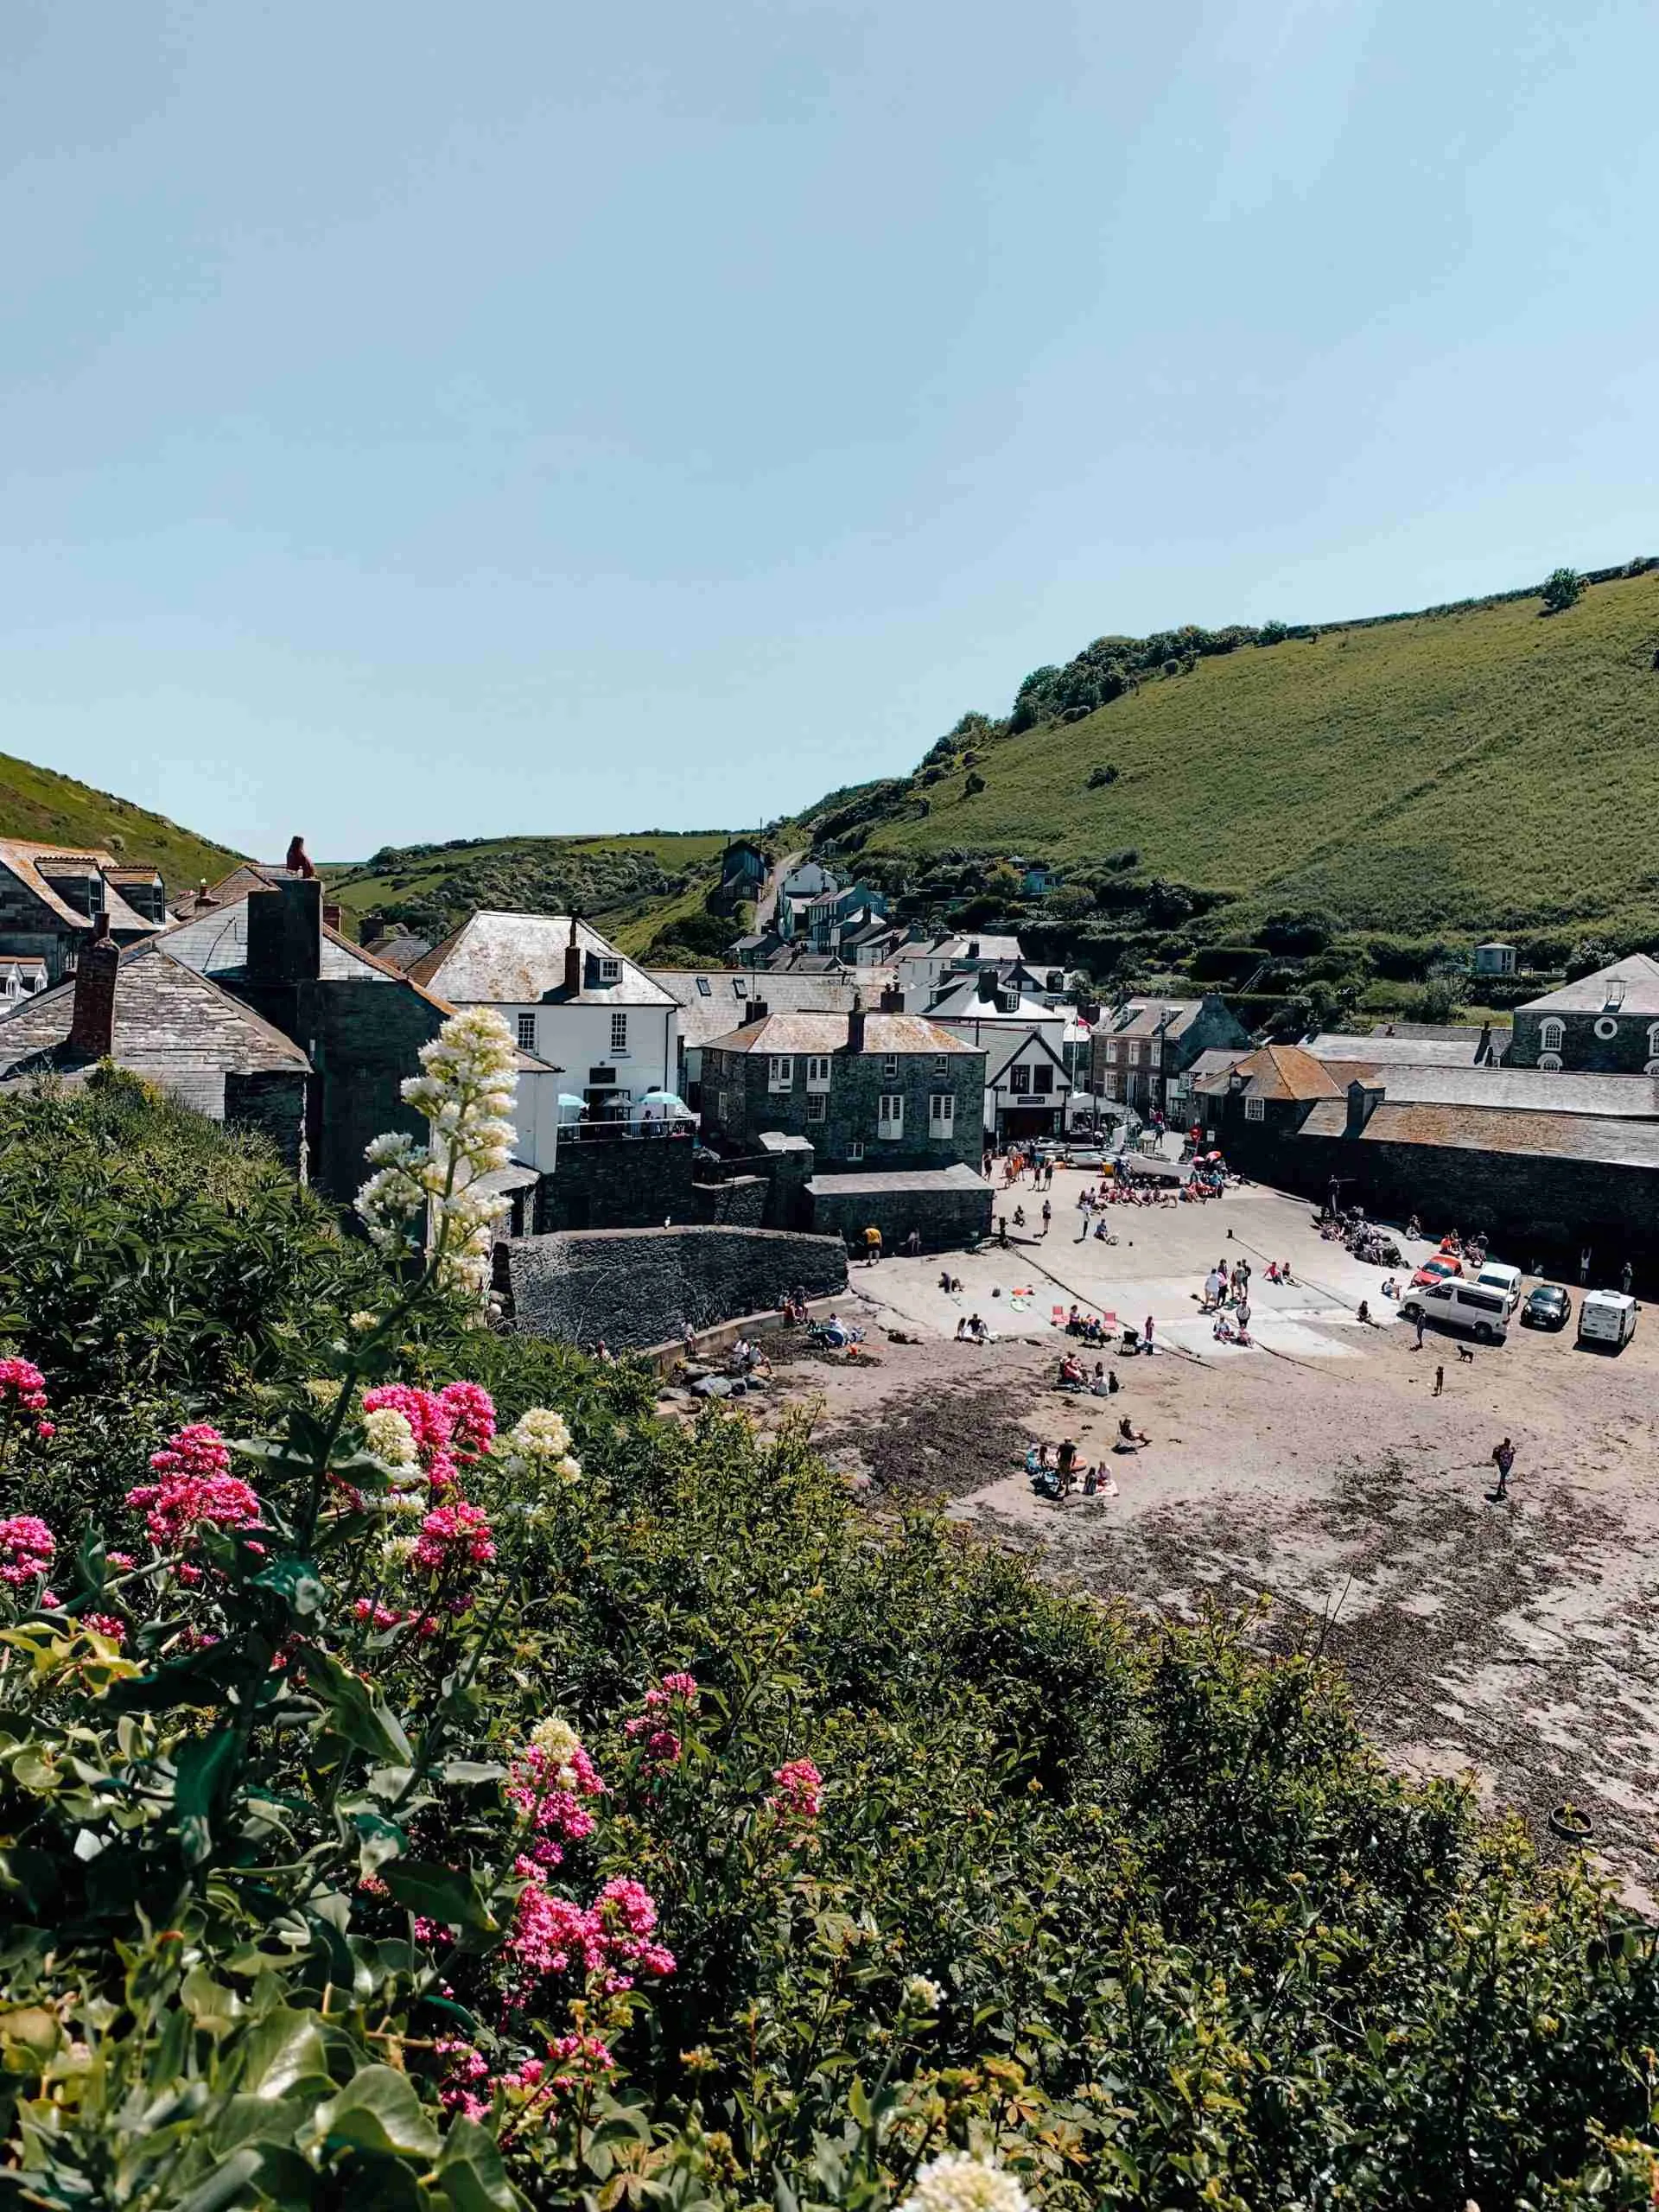 View overlooking the beach in Port Isaac, Cornwall. In the foreground that are clusters of pink flowers and beyond the town there are rolling green hills